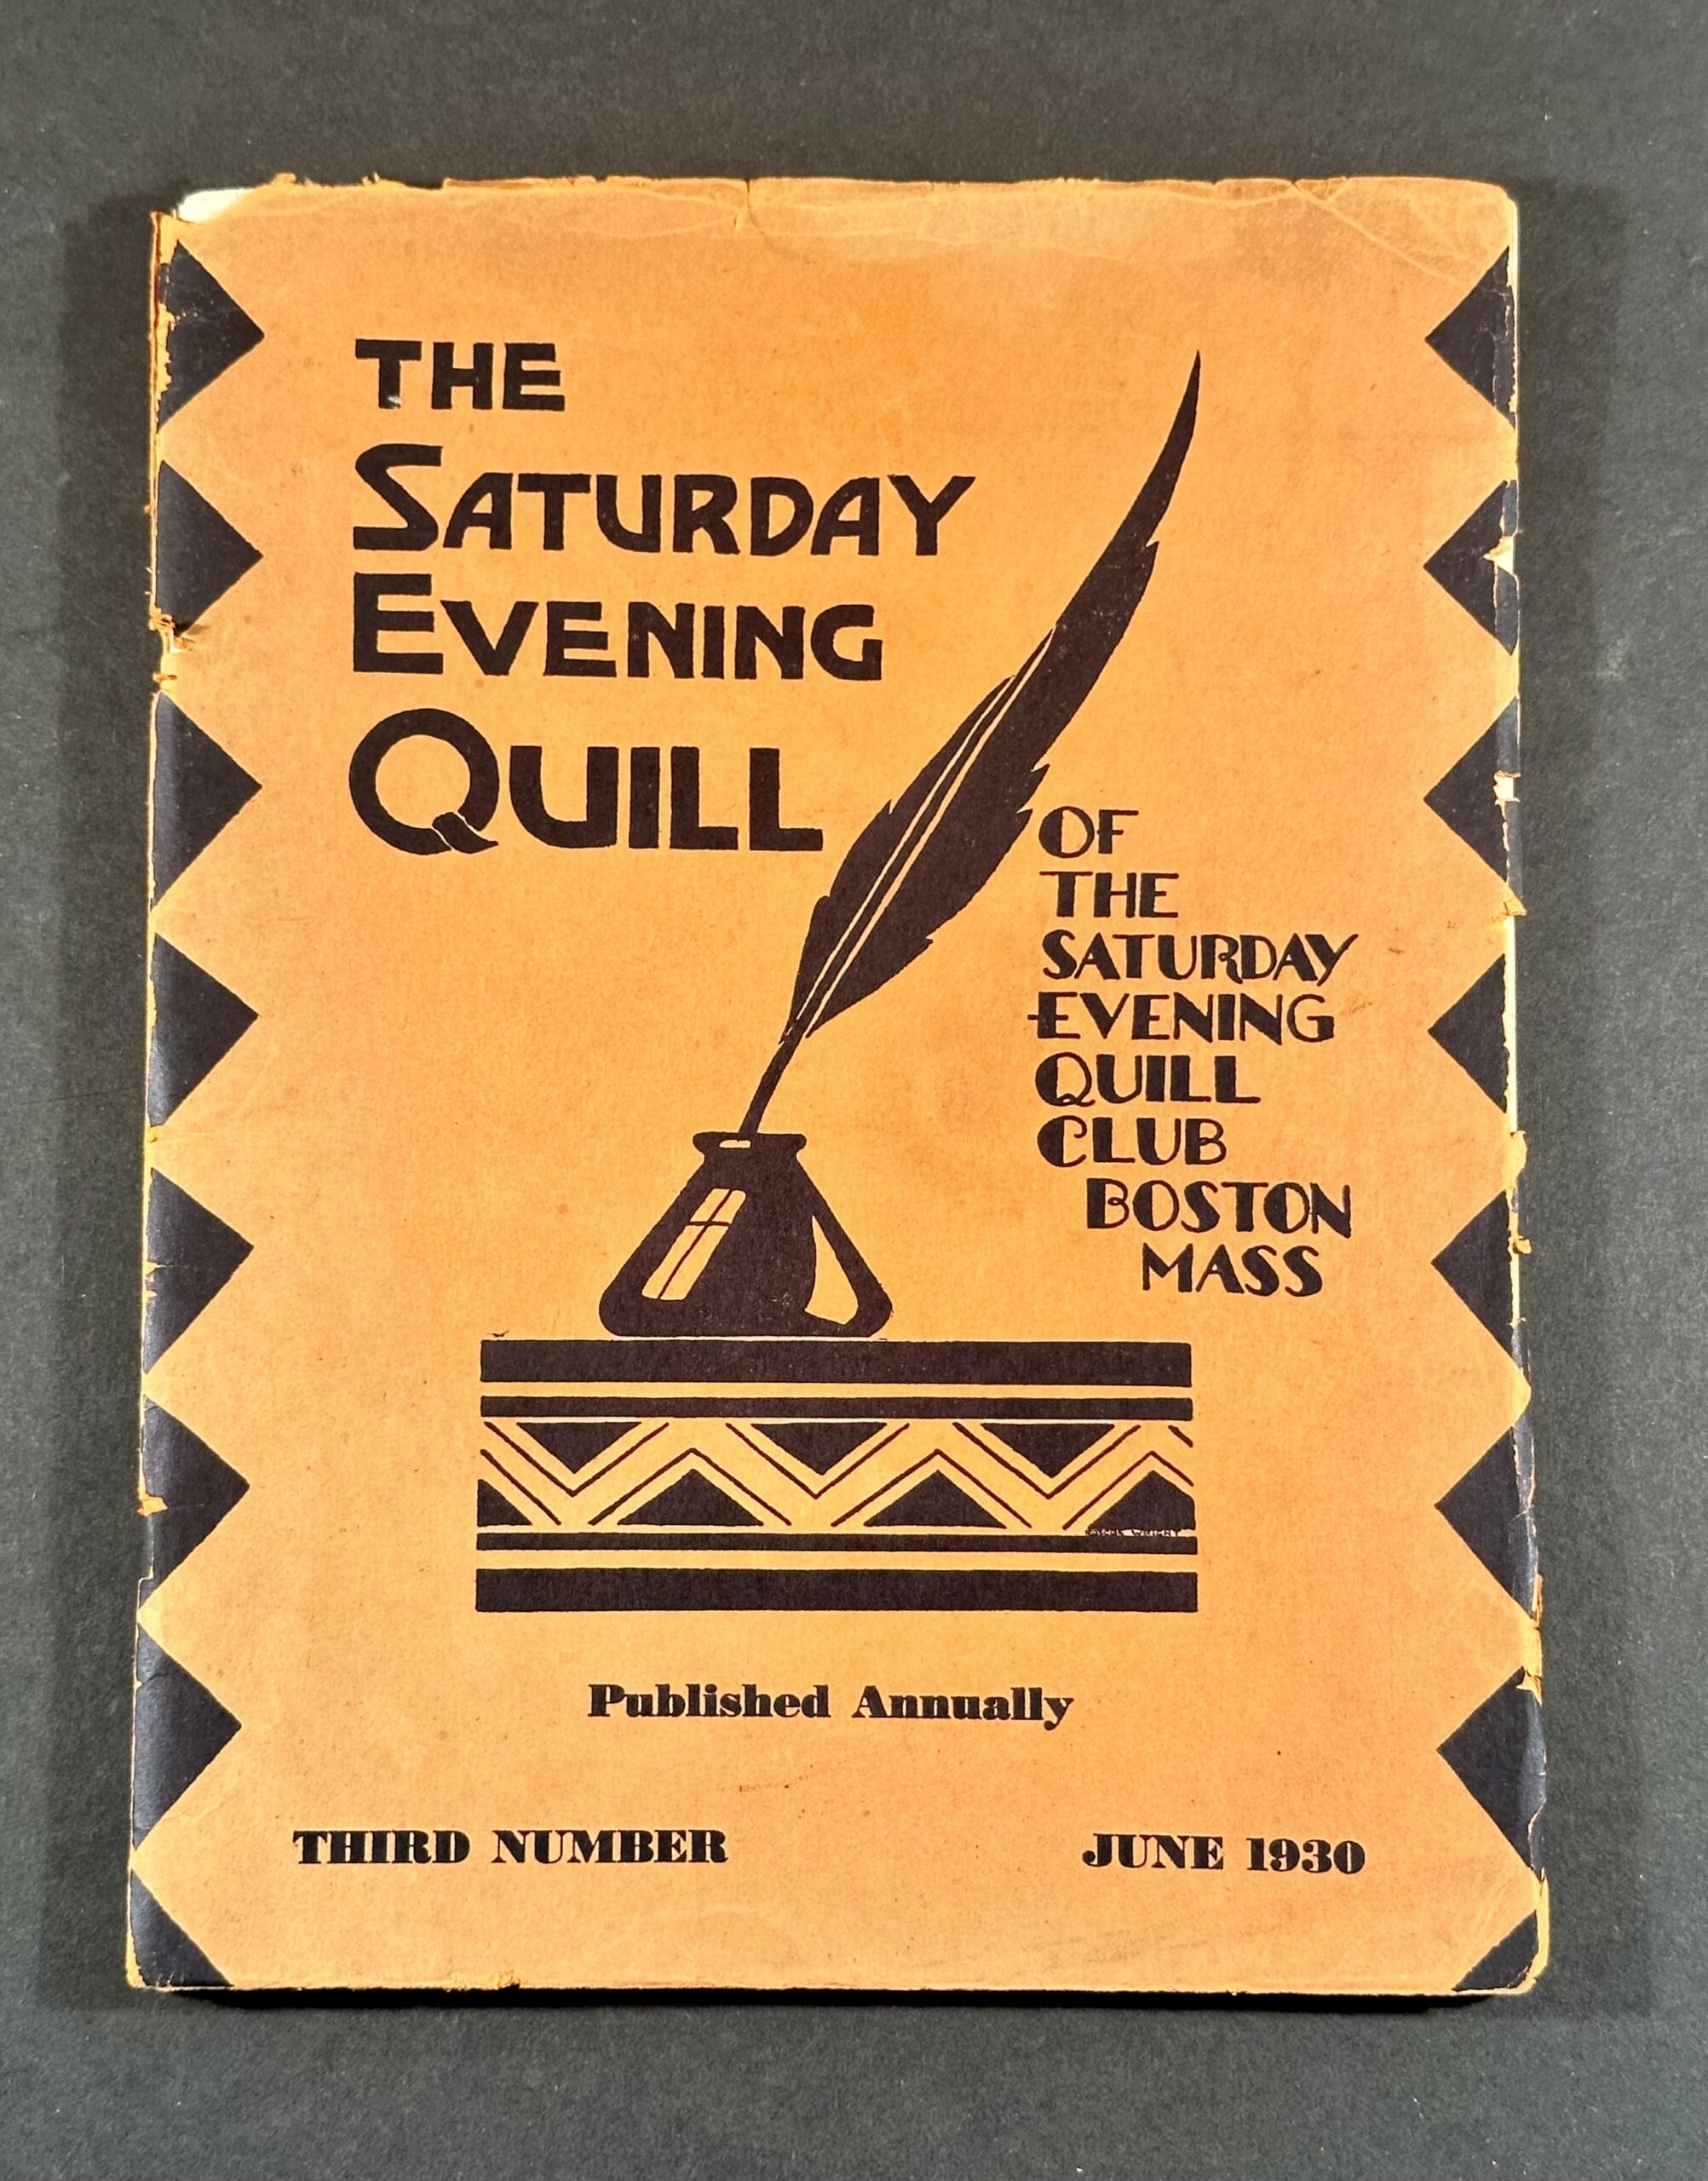 Gordon, Eugene. The Saturday Evening Quill, [June 1930], from the Alice Dunbar Nelson Papers collection